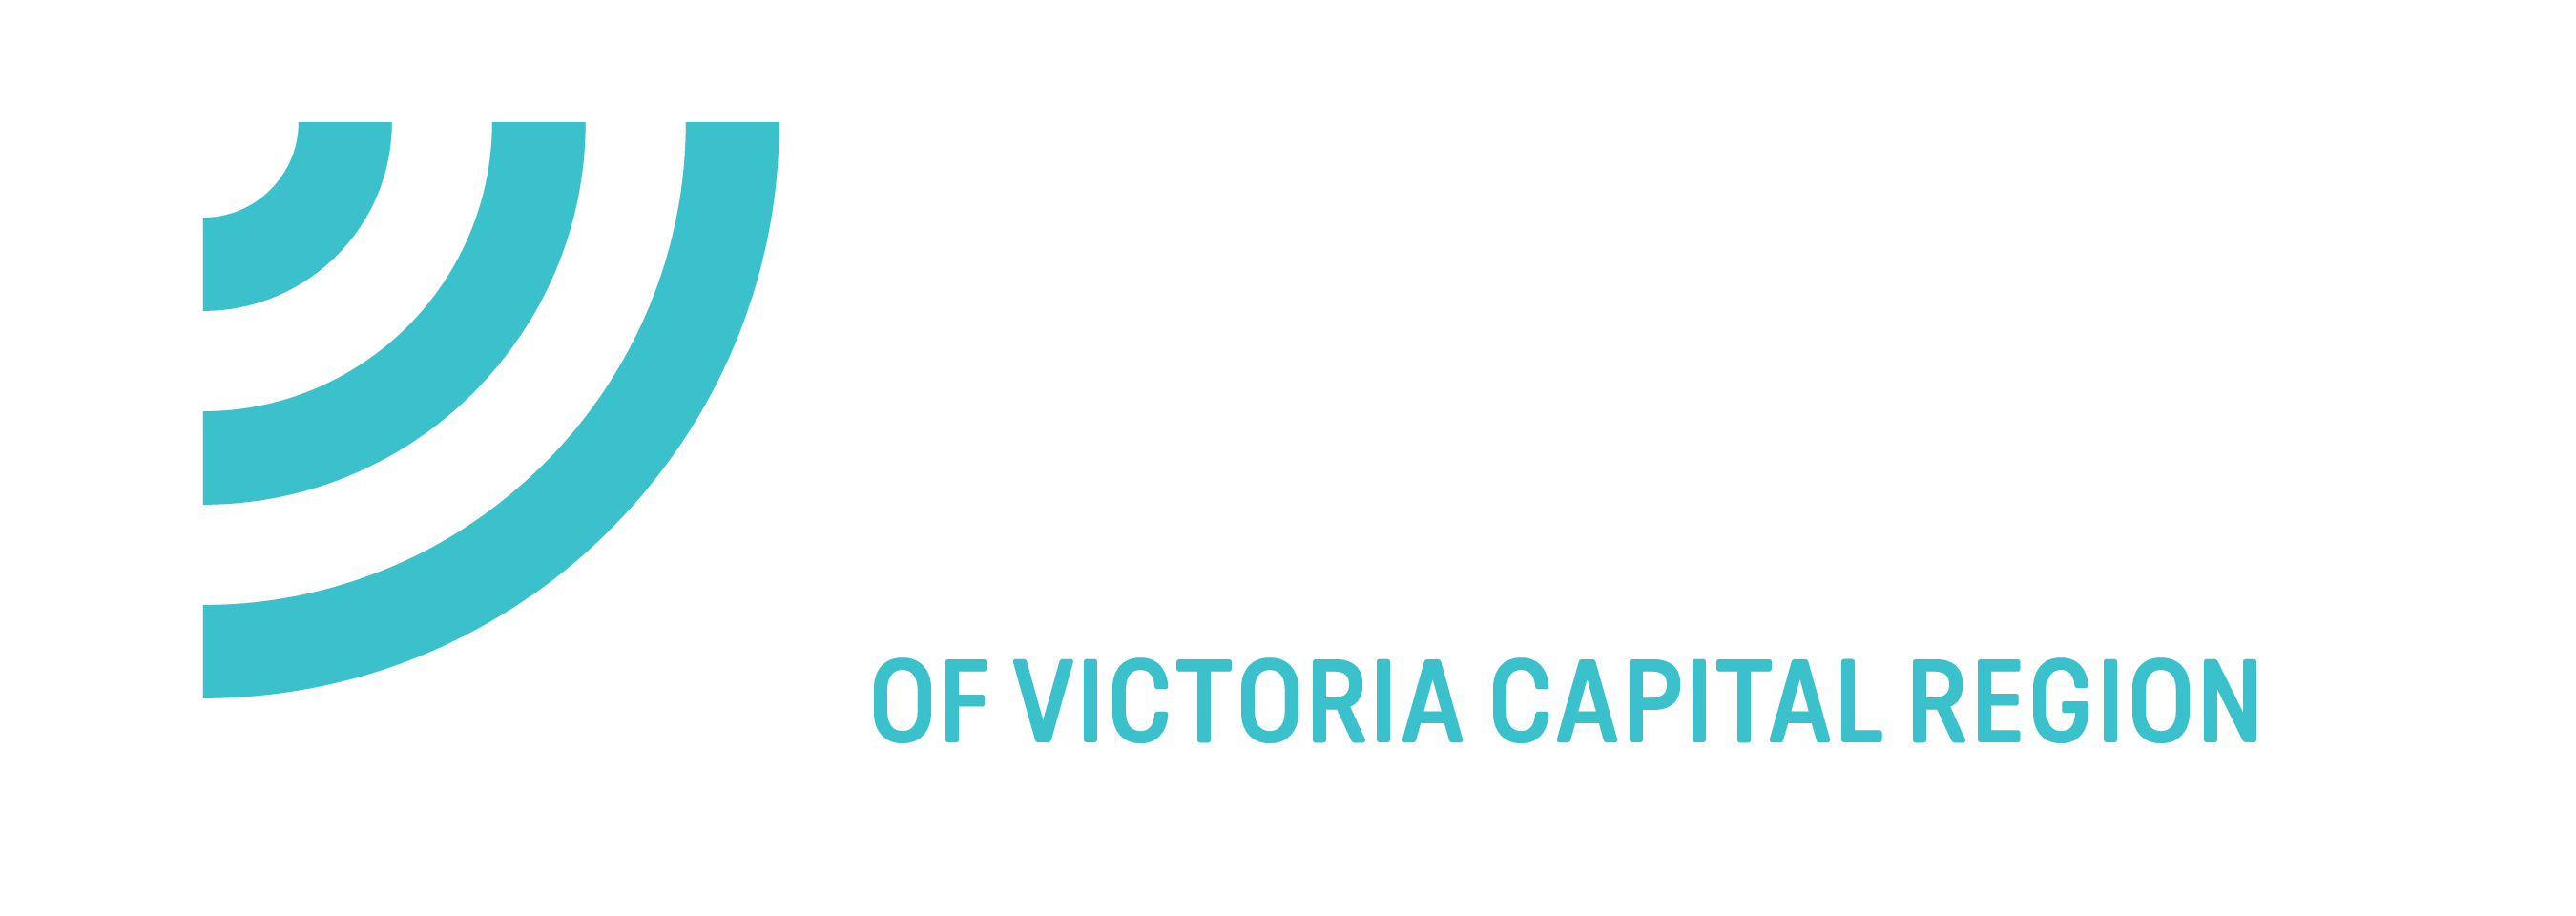 Stories Archive - Page 2 of 2 - Big Brothers Big Sisters of Victoria Capital Region